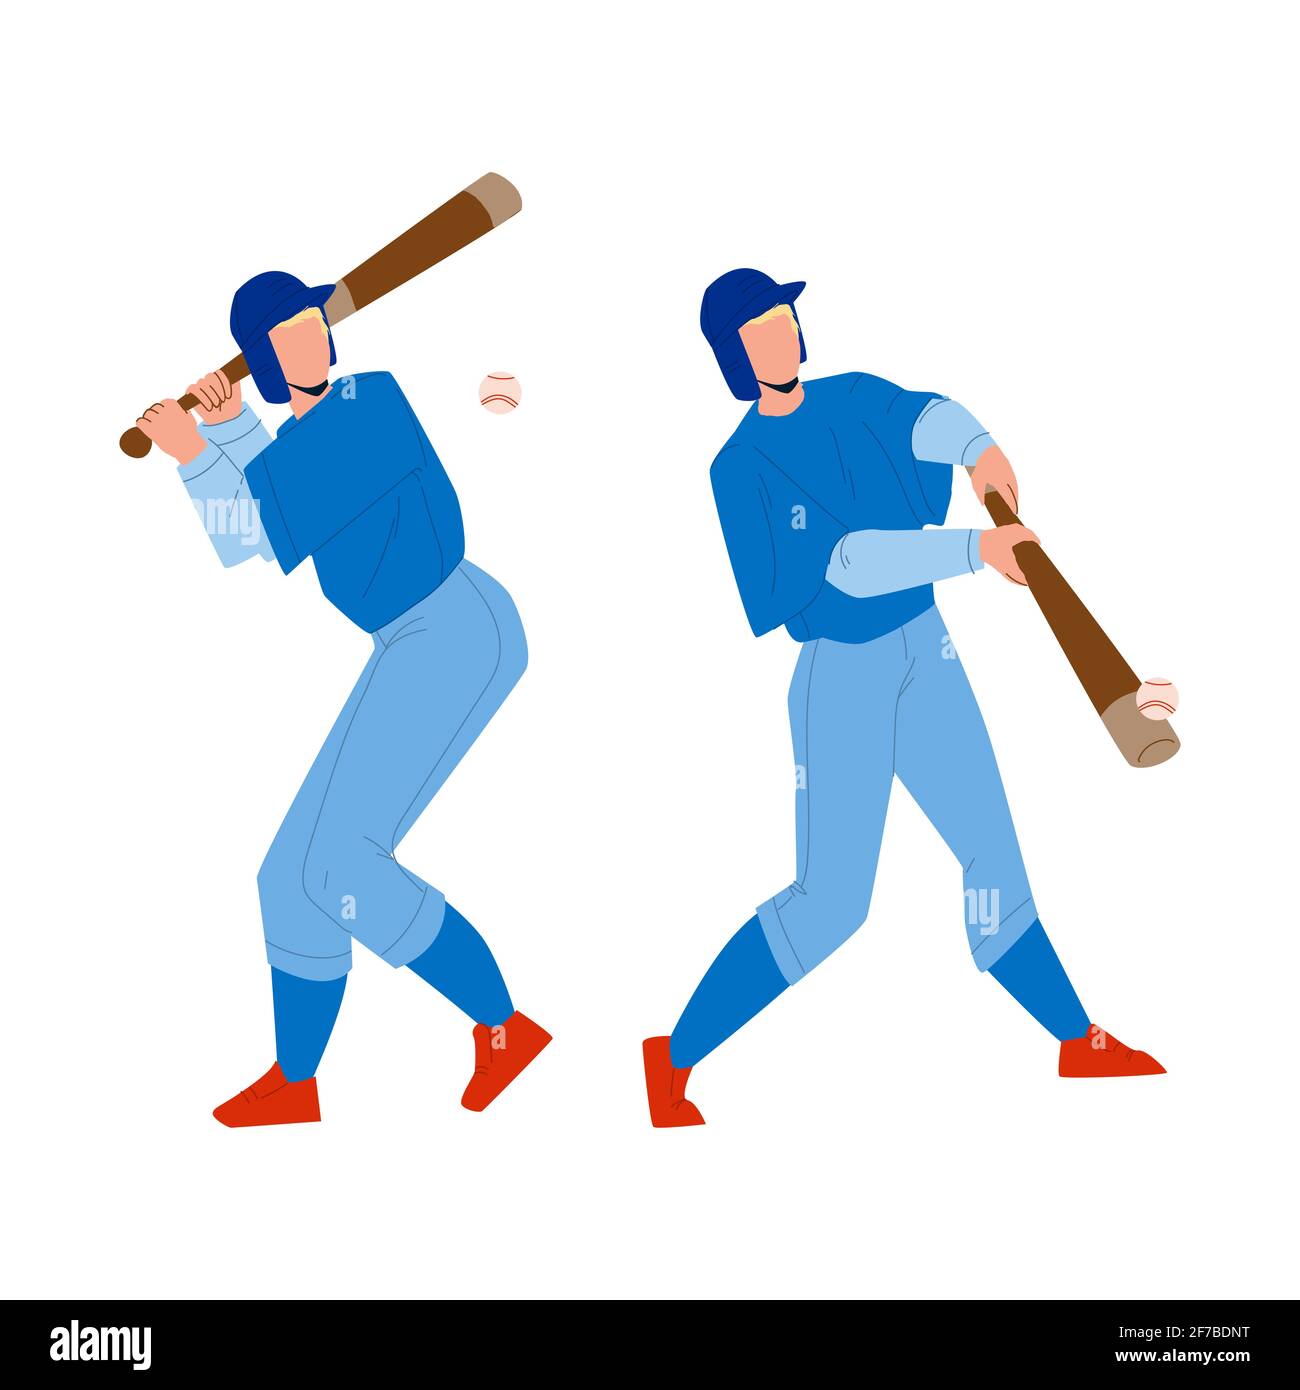 Baseball Player Hit Ball With Bat On Field Vector Stock Vector Image